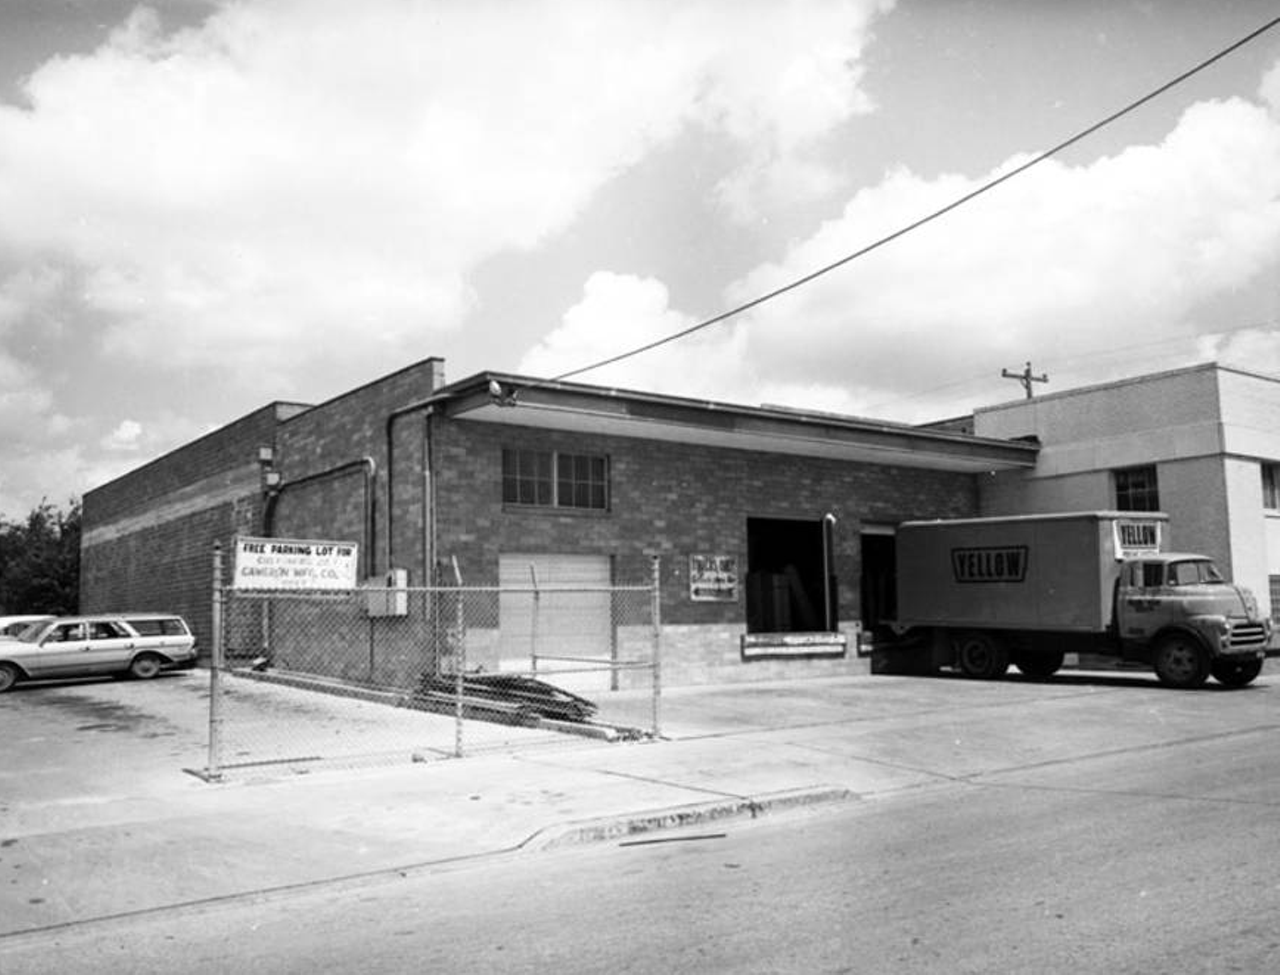 You can see a Yellow Freight System truck parked outside of Cameron Manufacturing Company, which sold wholesale automobile accessories, in this 1968 photo. The company was located at 708 W. Martin Street.